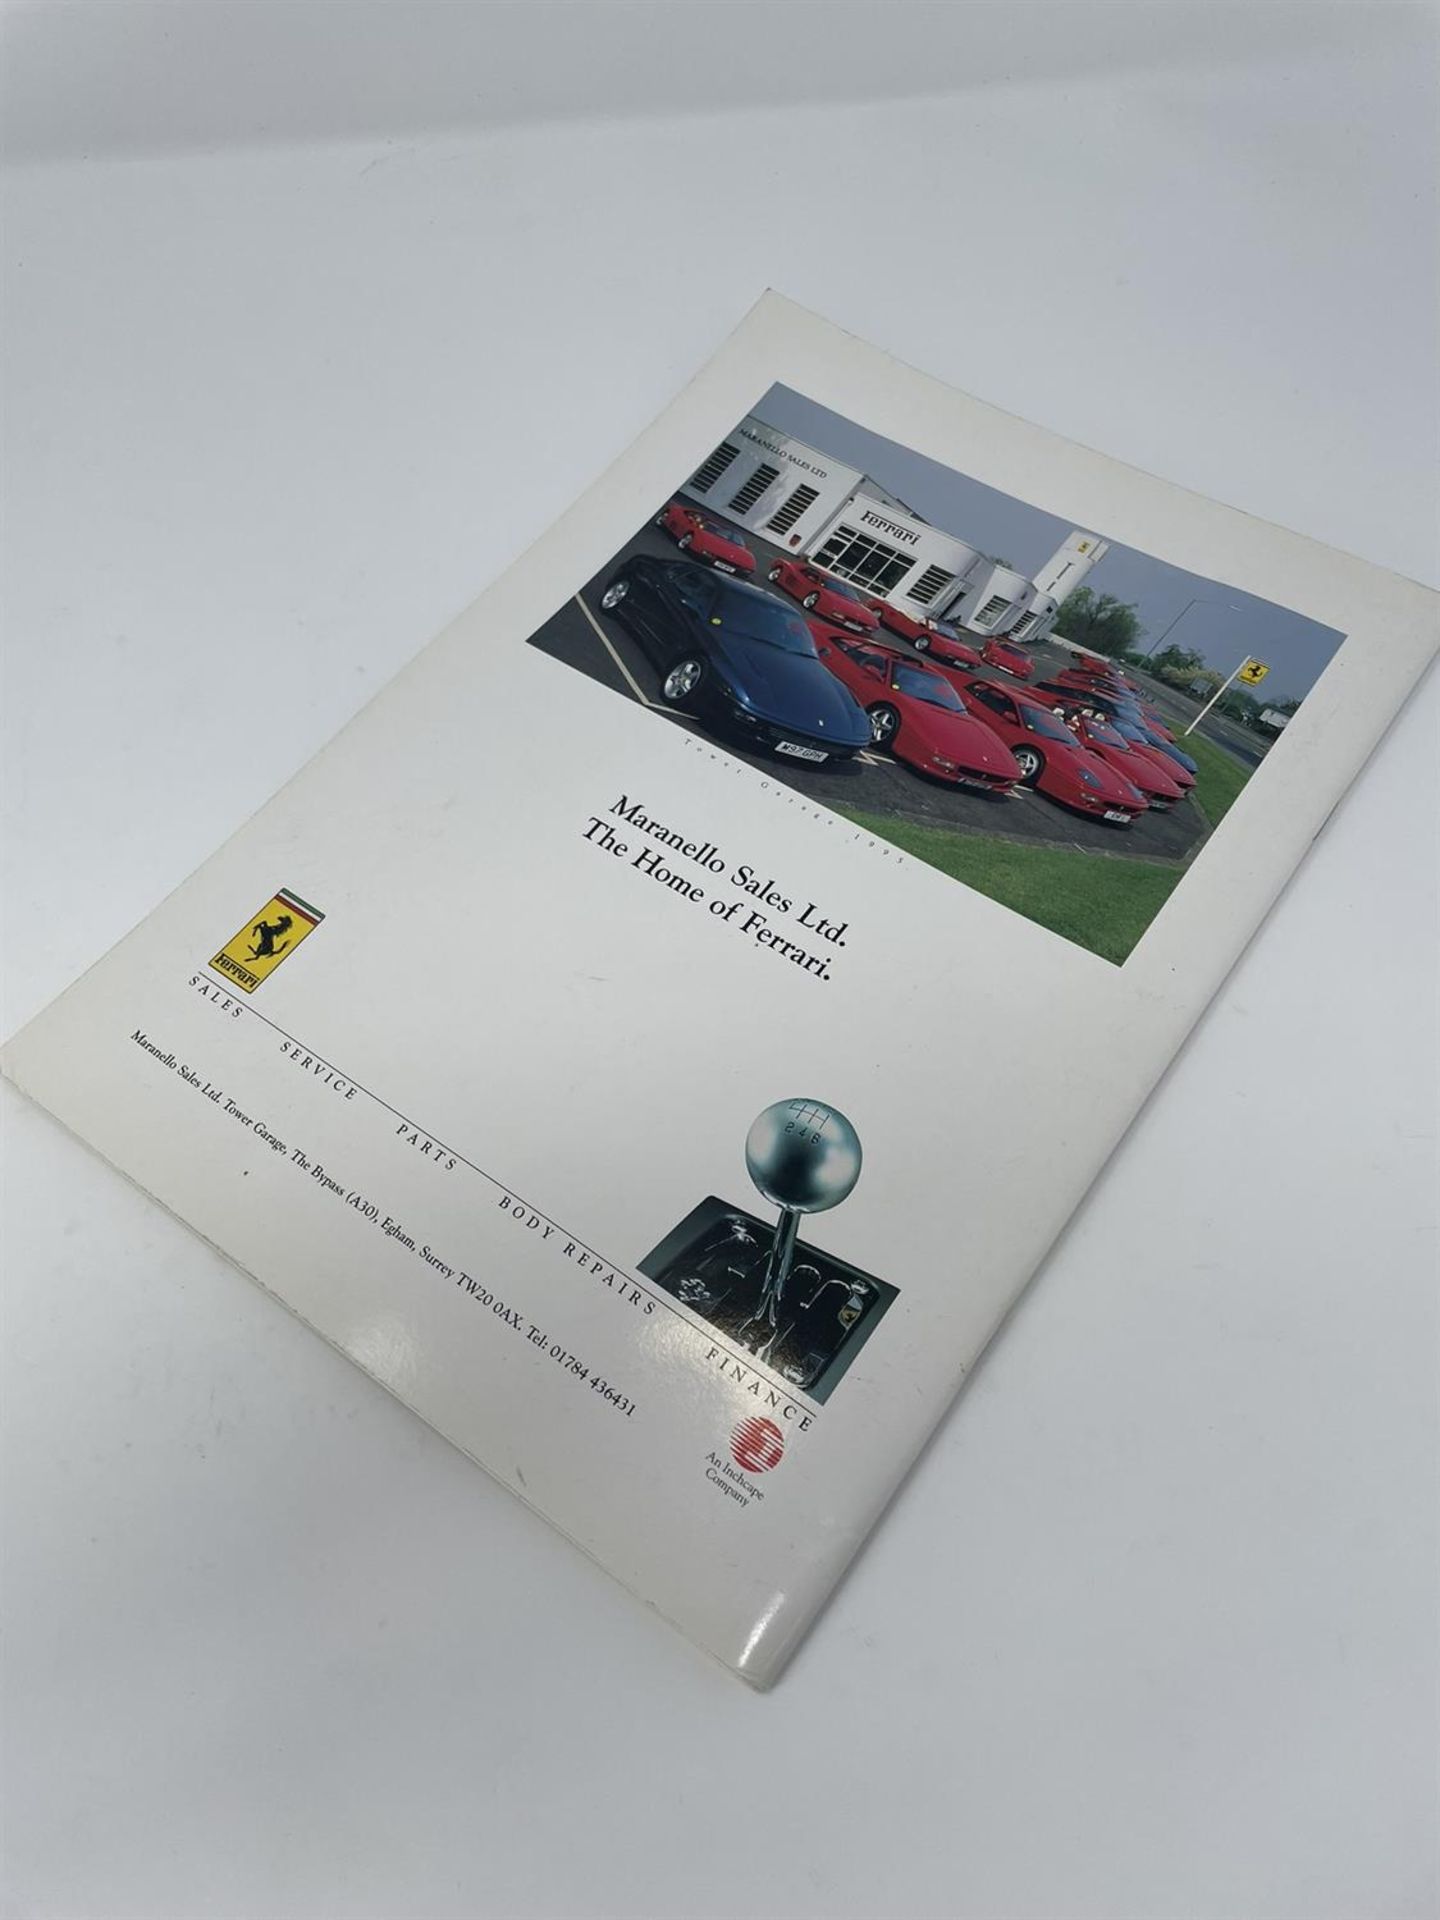 Ferrari Owners Club GB magazine signed by Michael Schumacher - Image 3 of 6